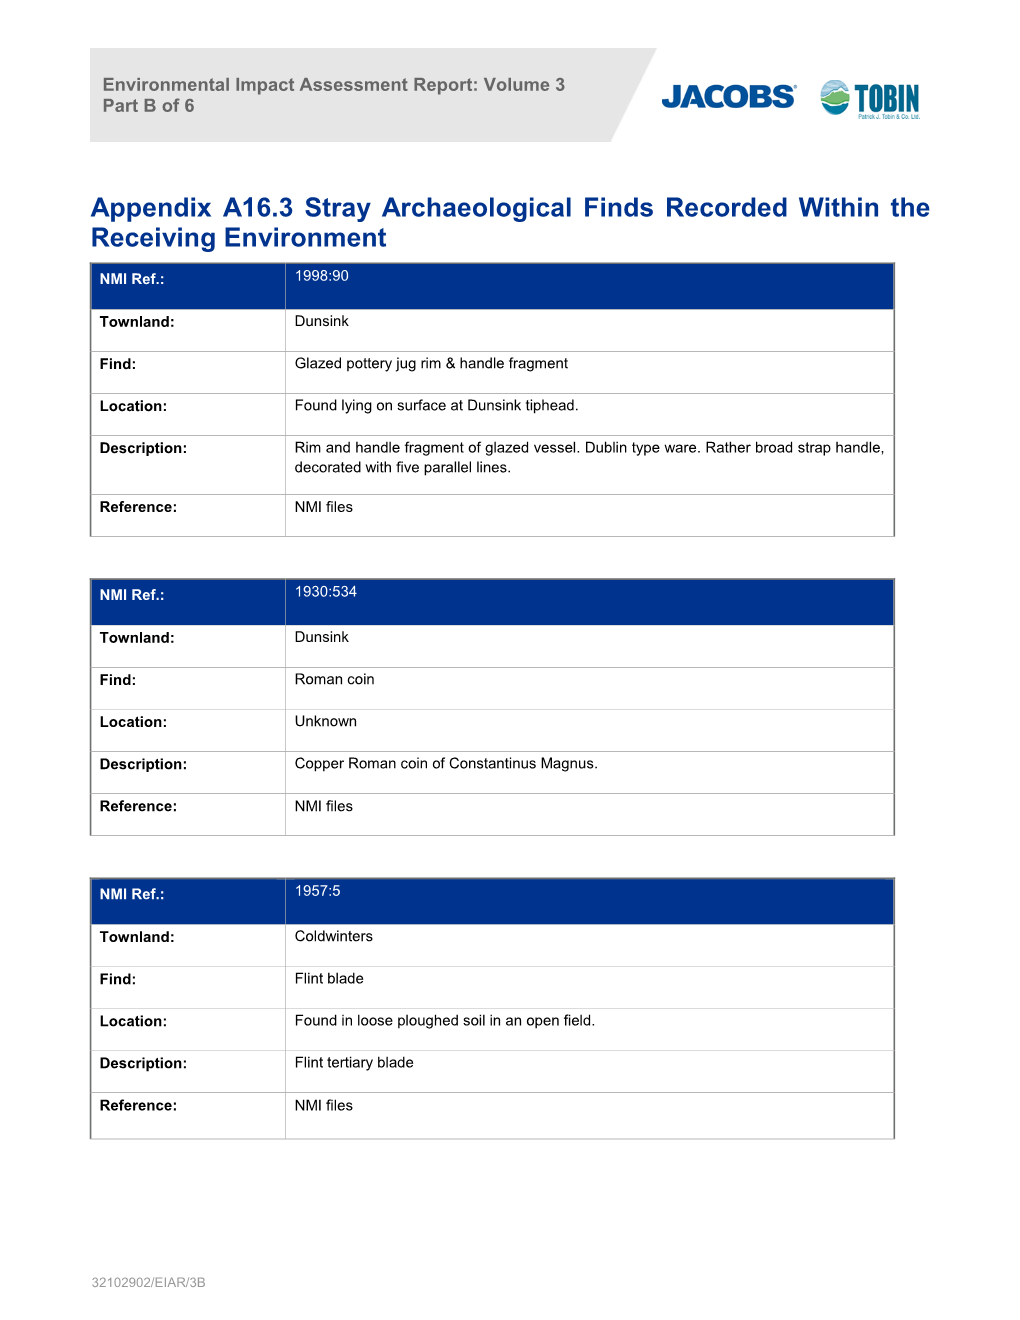 Appendix A16.3 Stray Archaeological Finds Recorded Within the Receiving Environment